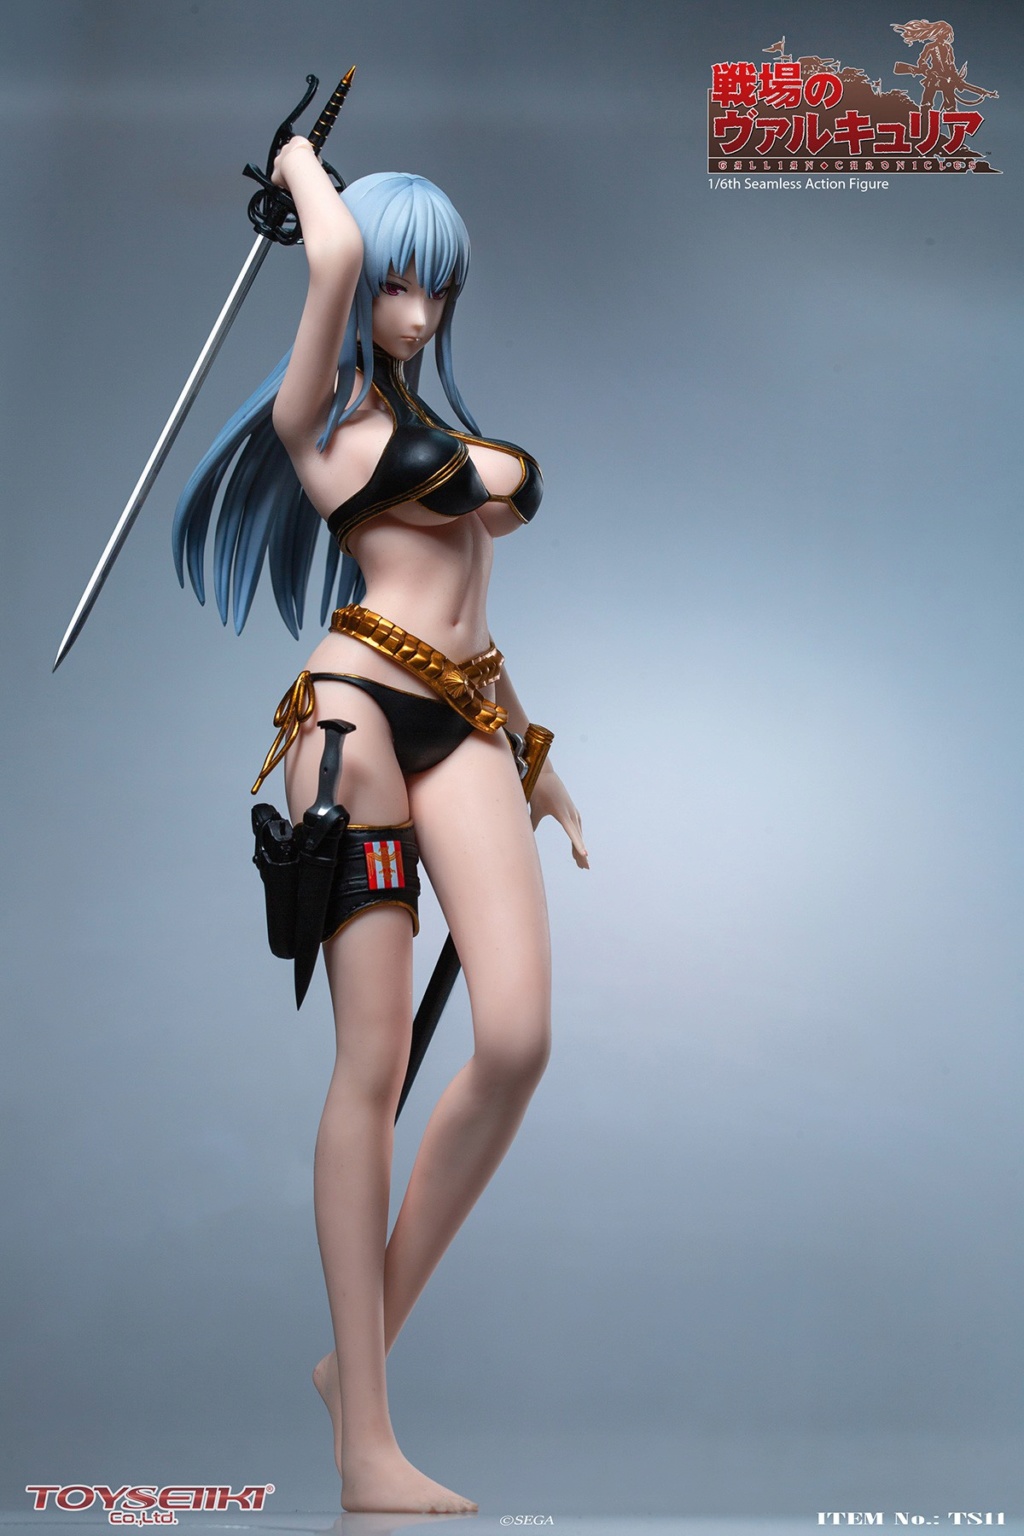 NEW PRODUCT: TOYSEIIKI: 1/6 "The Valkyrie of the Battlefield"- Selvaria Bles Action Figure (# TS11) 12000210